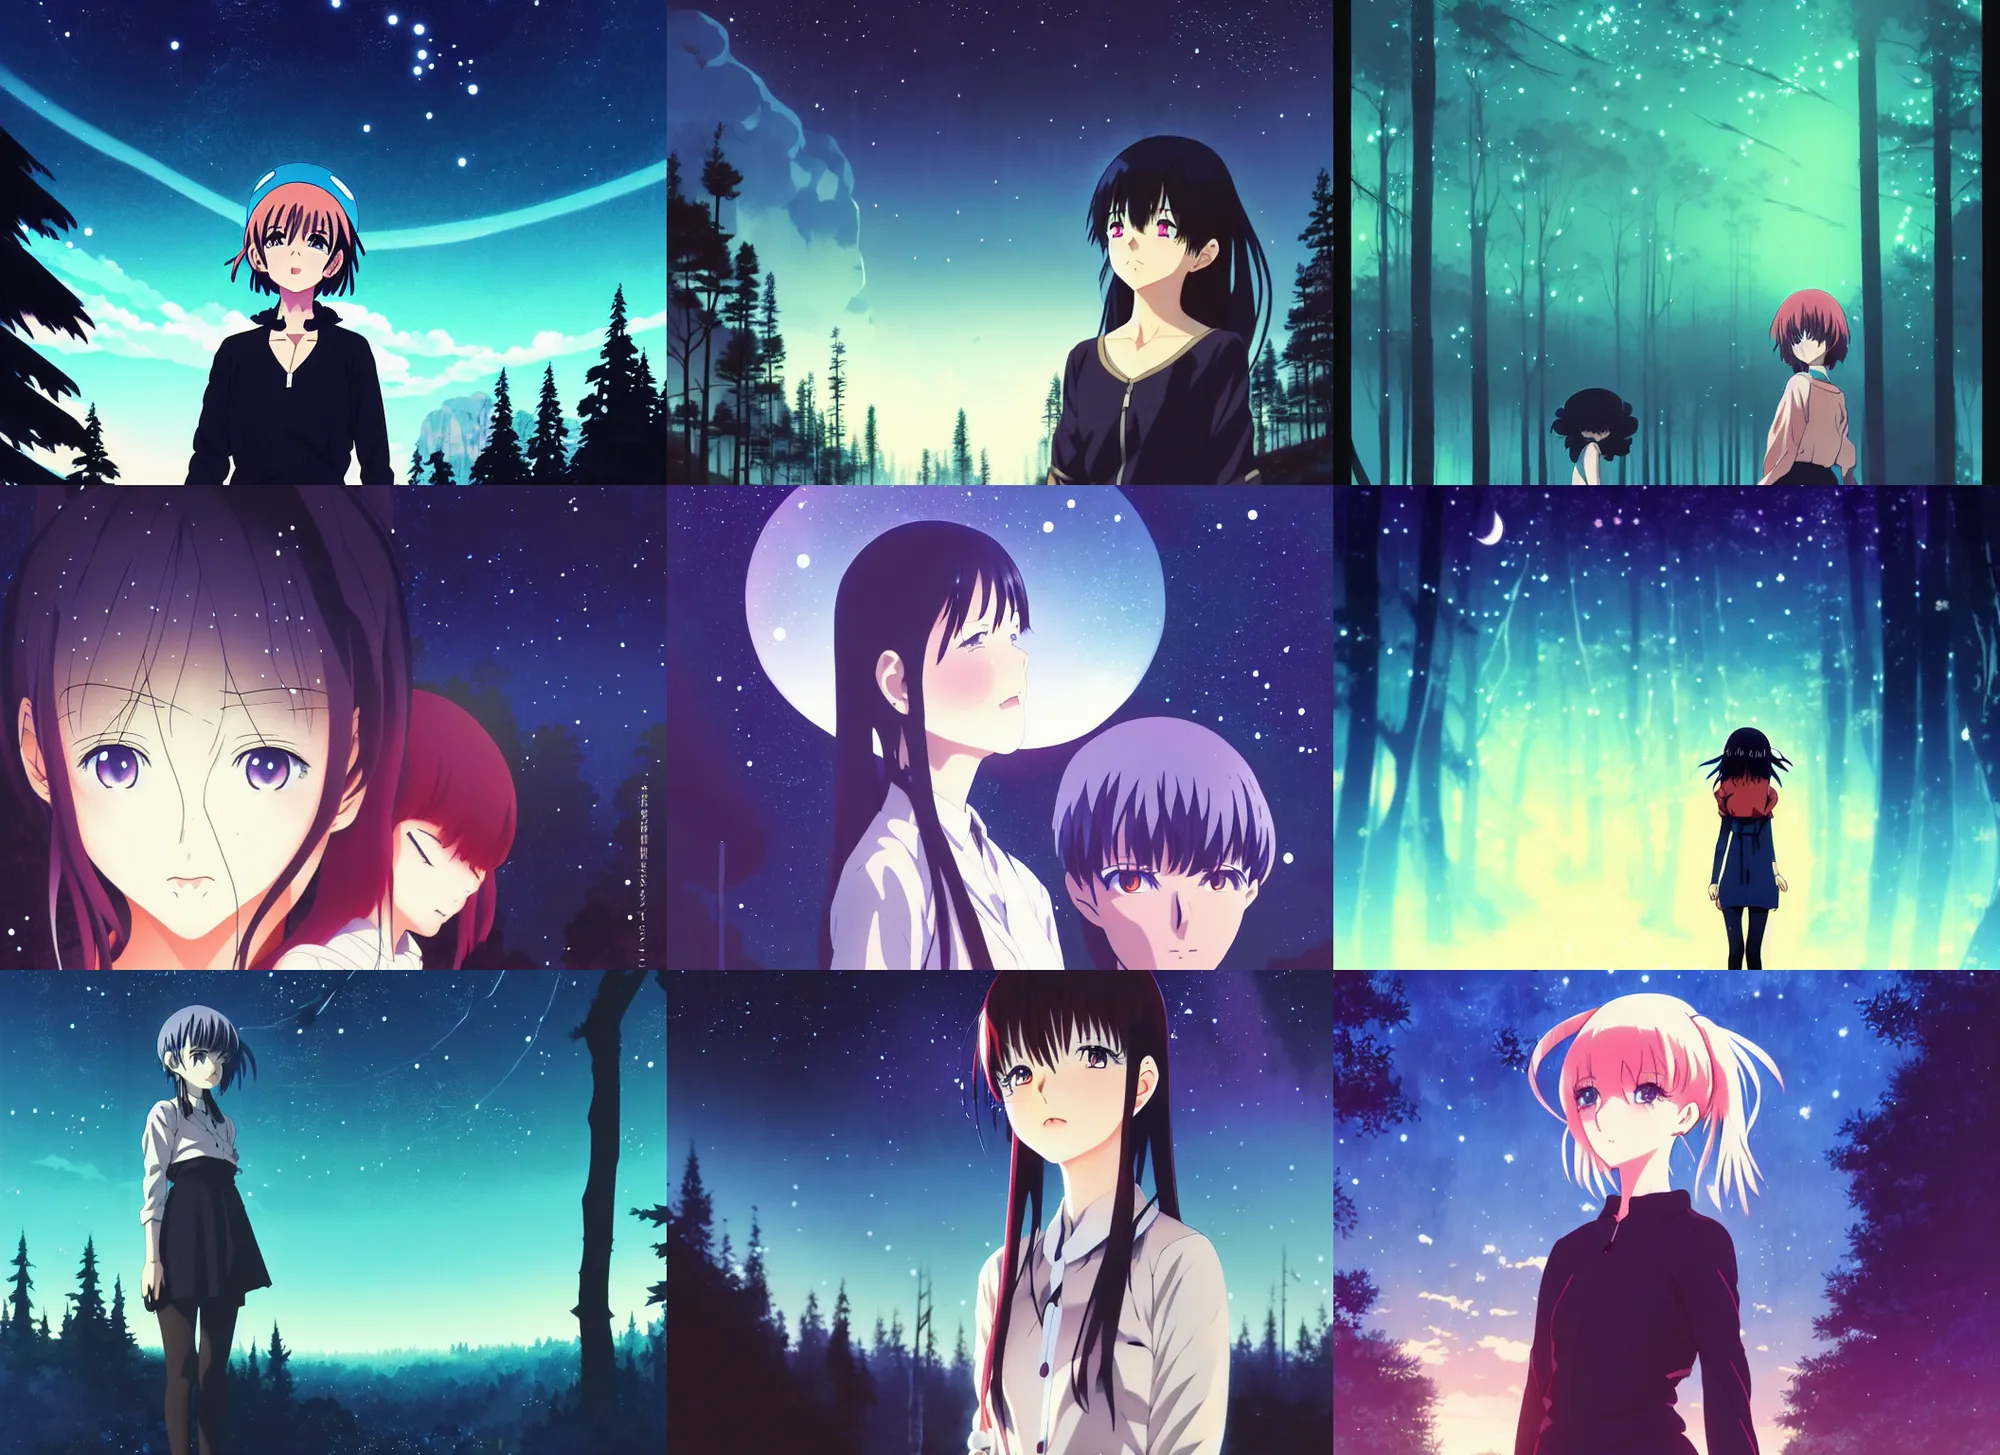 Prompt: anime cels, anime key visual, young woman traveling in a forest at night, night sky, nebula, very dark, cute face by ilya kuvshinov, yoh yoshinari, dynamic pose, dynamic perspective, rounded eyes, smooth facial features, dramatic lighting, psycho pass